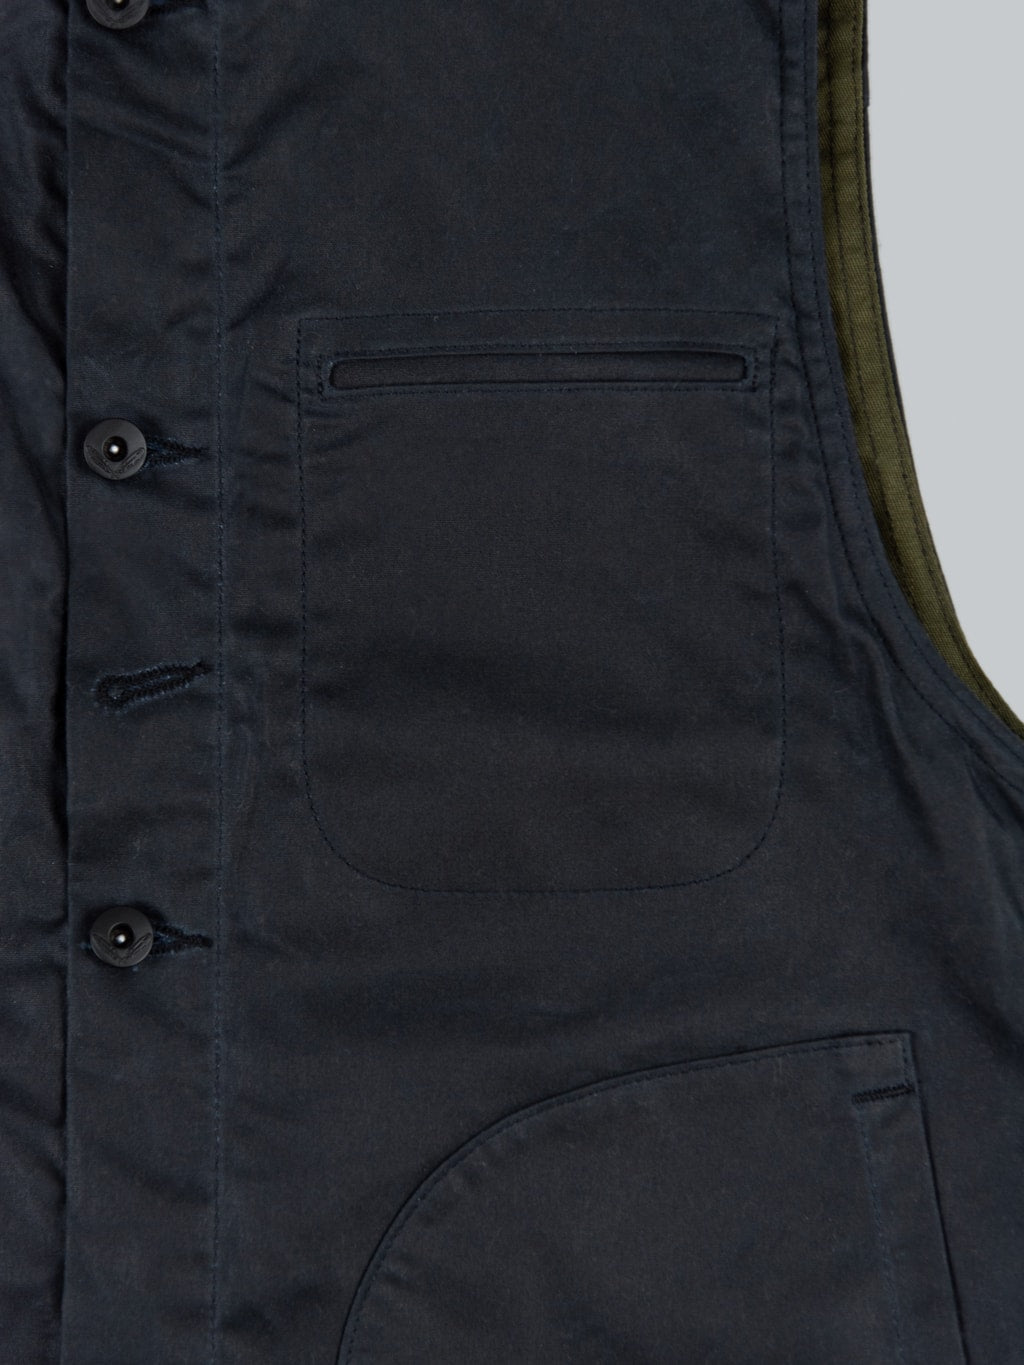 rogue territory lined waxed canvas supply vest 8.25oz black details